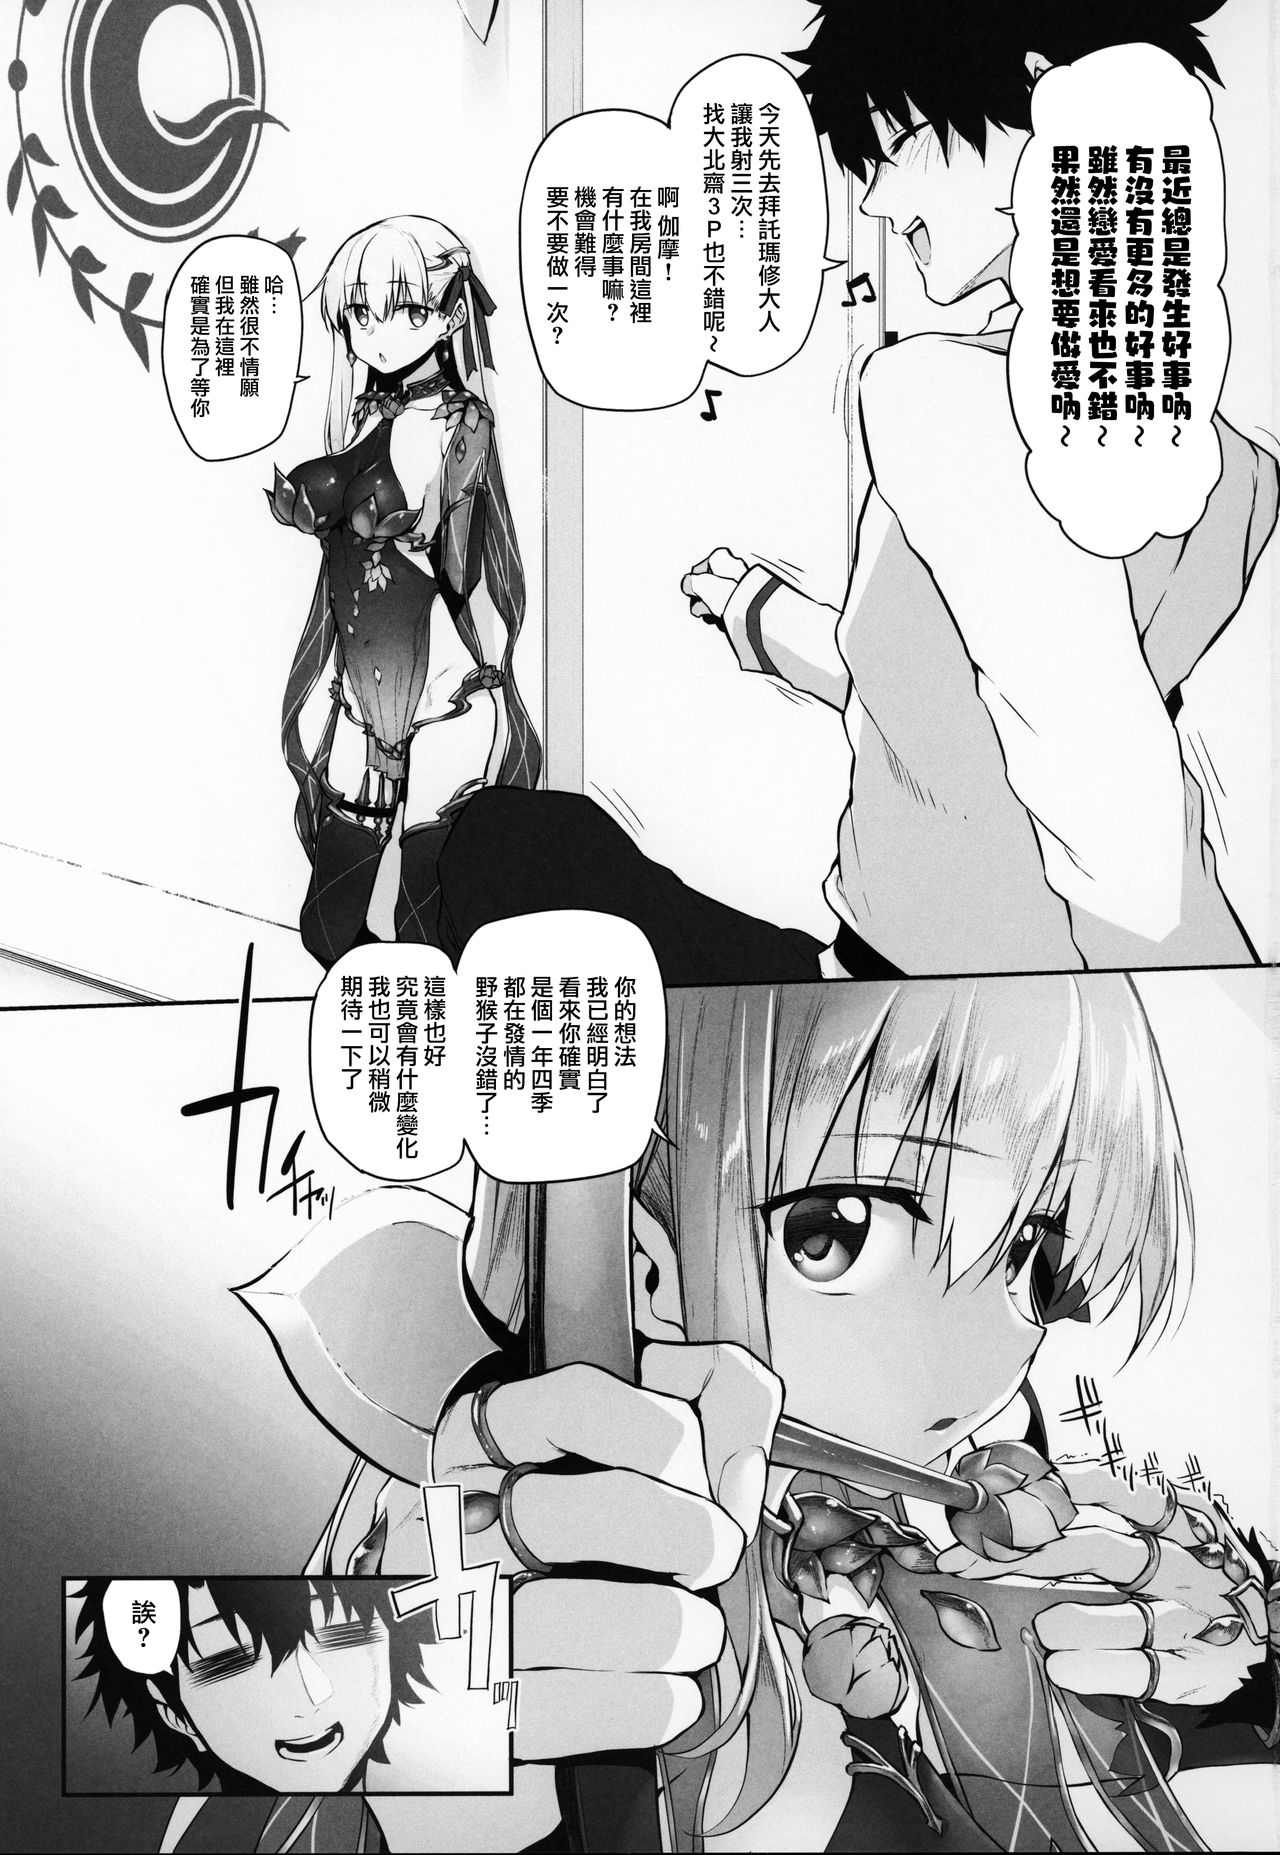 (C96) [Marked-two (Suga Hideo)] Marked Girls Vol. 21 (Fate/Grand Order) [Chinese] [無邪気漢化組] page 3 full